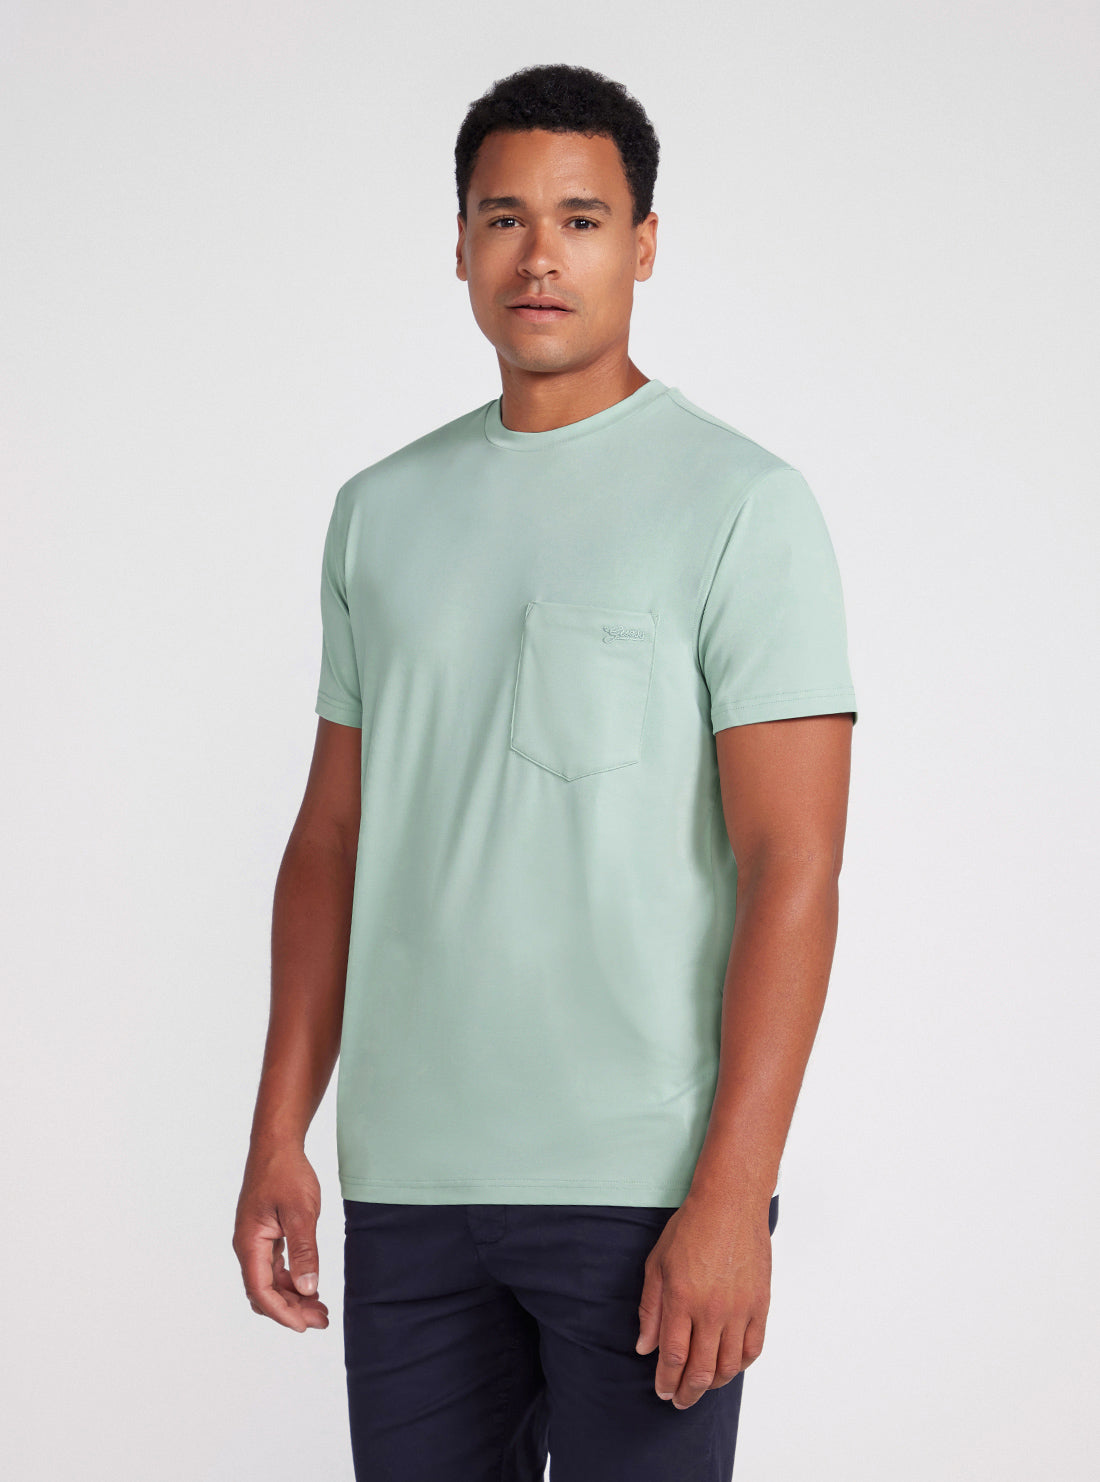 Mint Green Smooth T-Shirt | GUESS Men's Apparel | side view